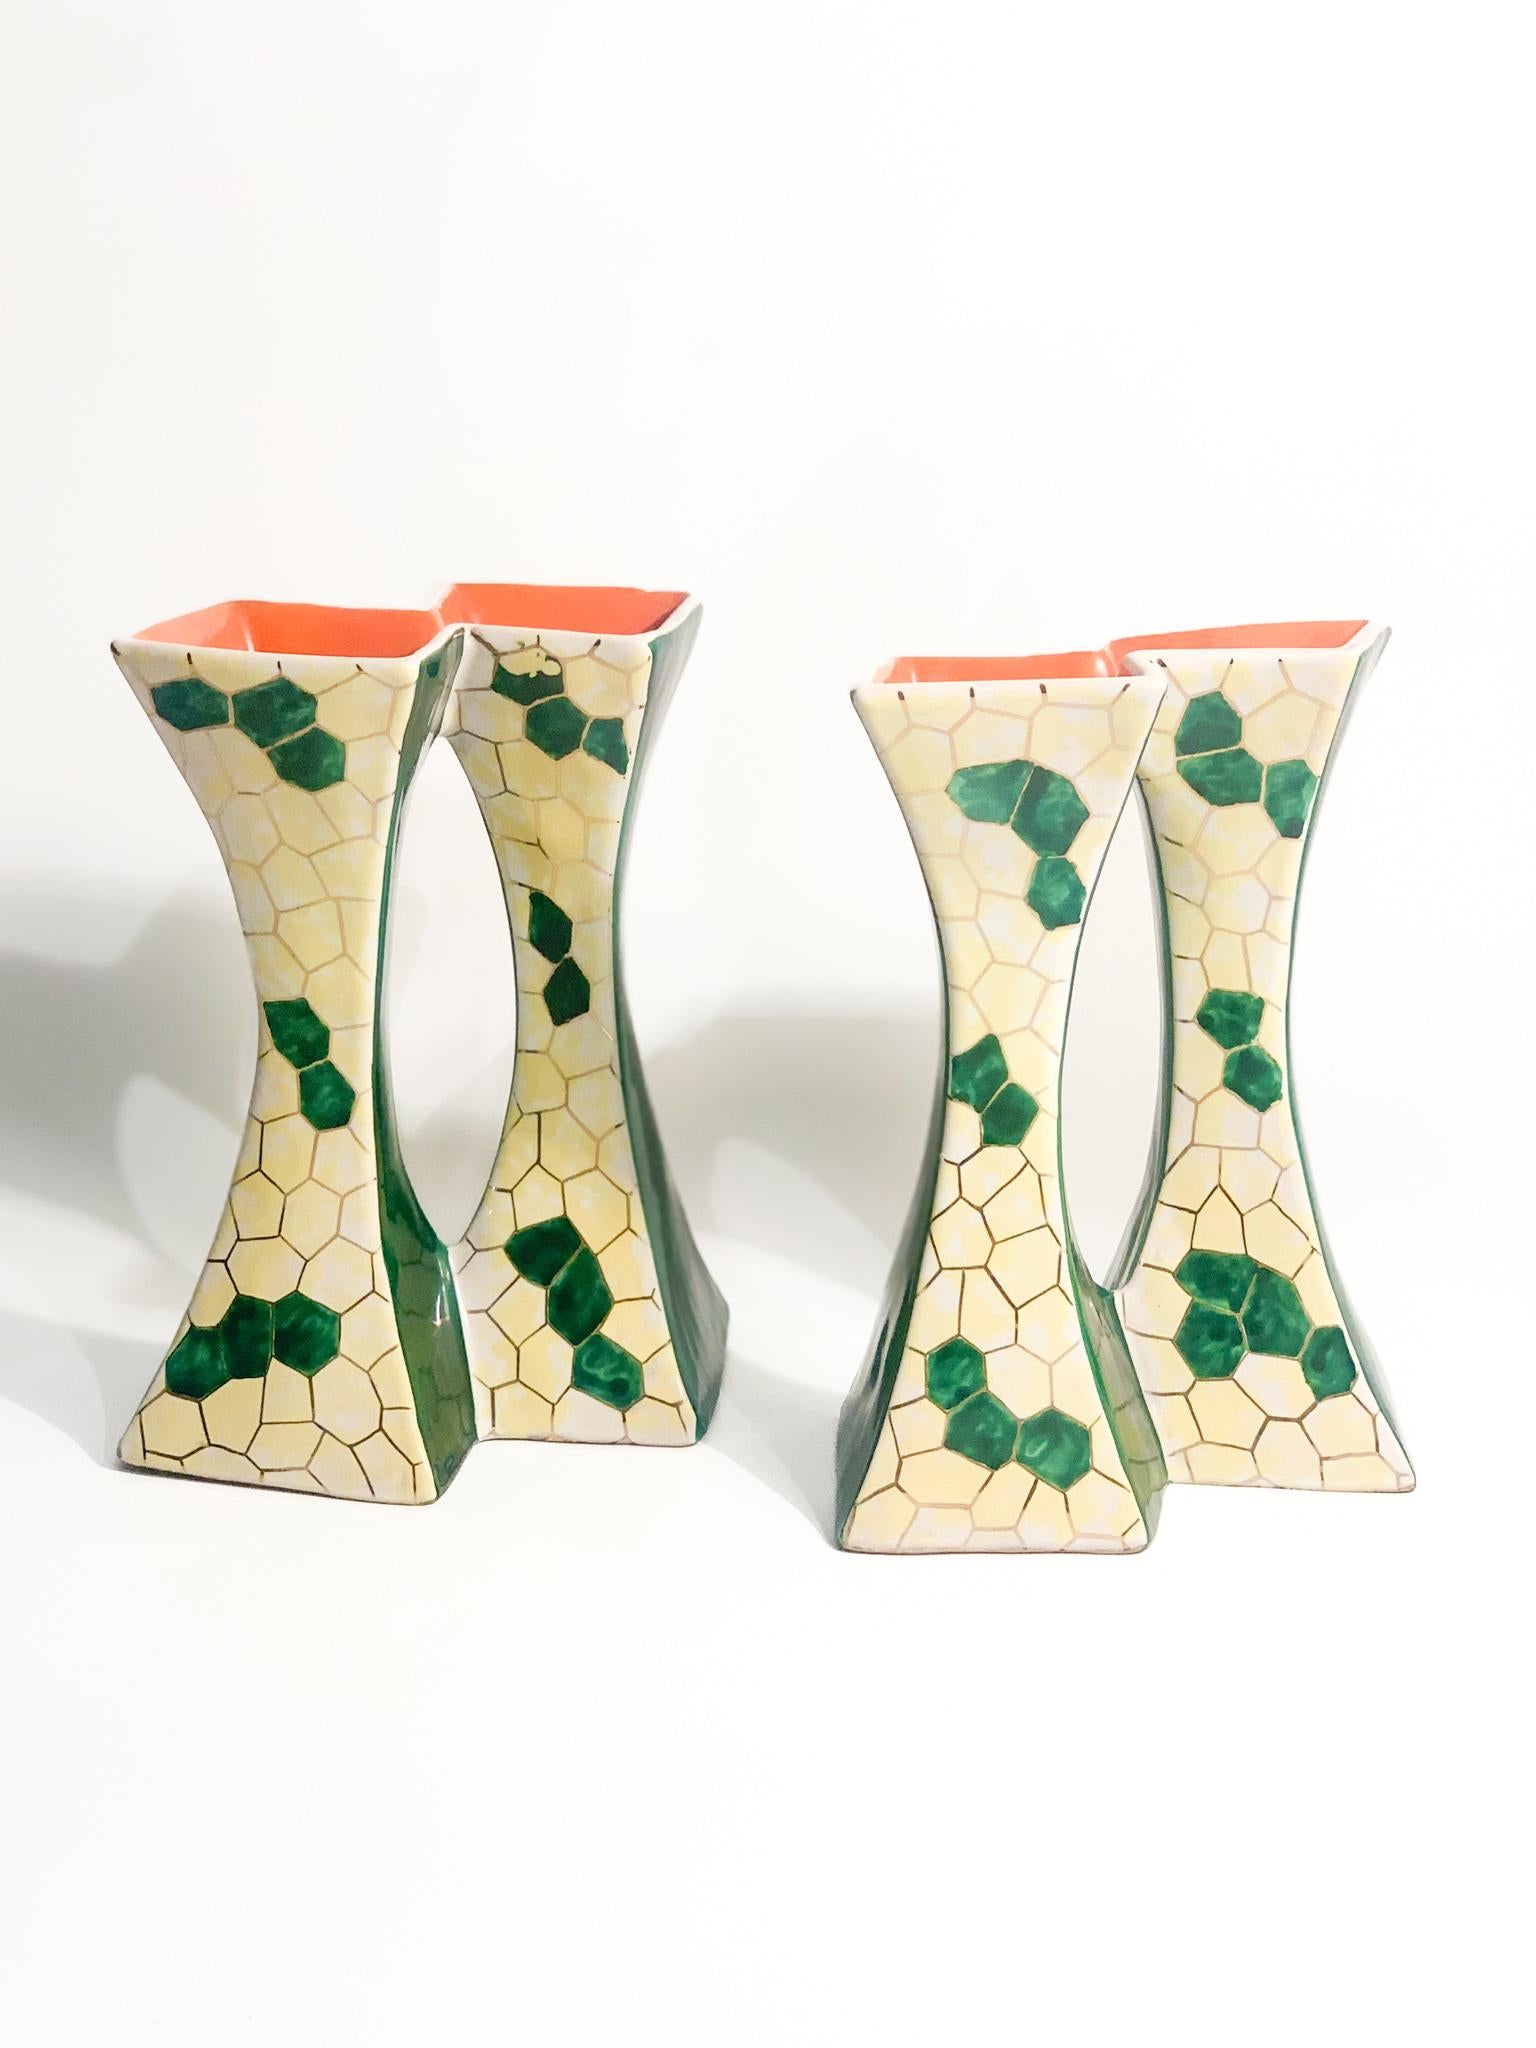 Pair of ceramic candle holders (4 wind instruments) hand painted in green, orange and yellow, made by Pucci Umbertide in the 1950s

Ø 17 cm h 19 cm

One of the candle holder ha a little chip at the top, has shown in the pictures. Additional pictures